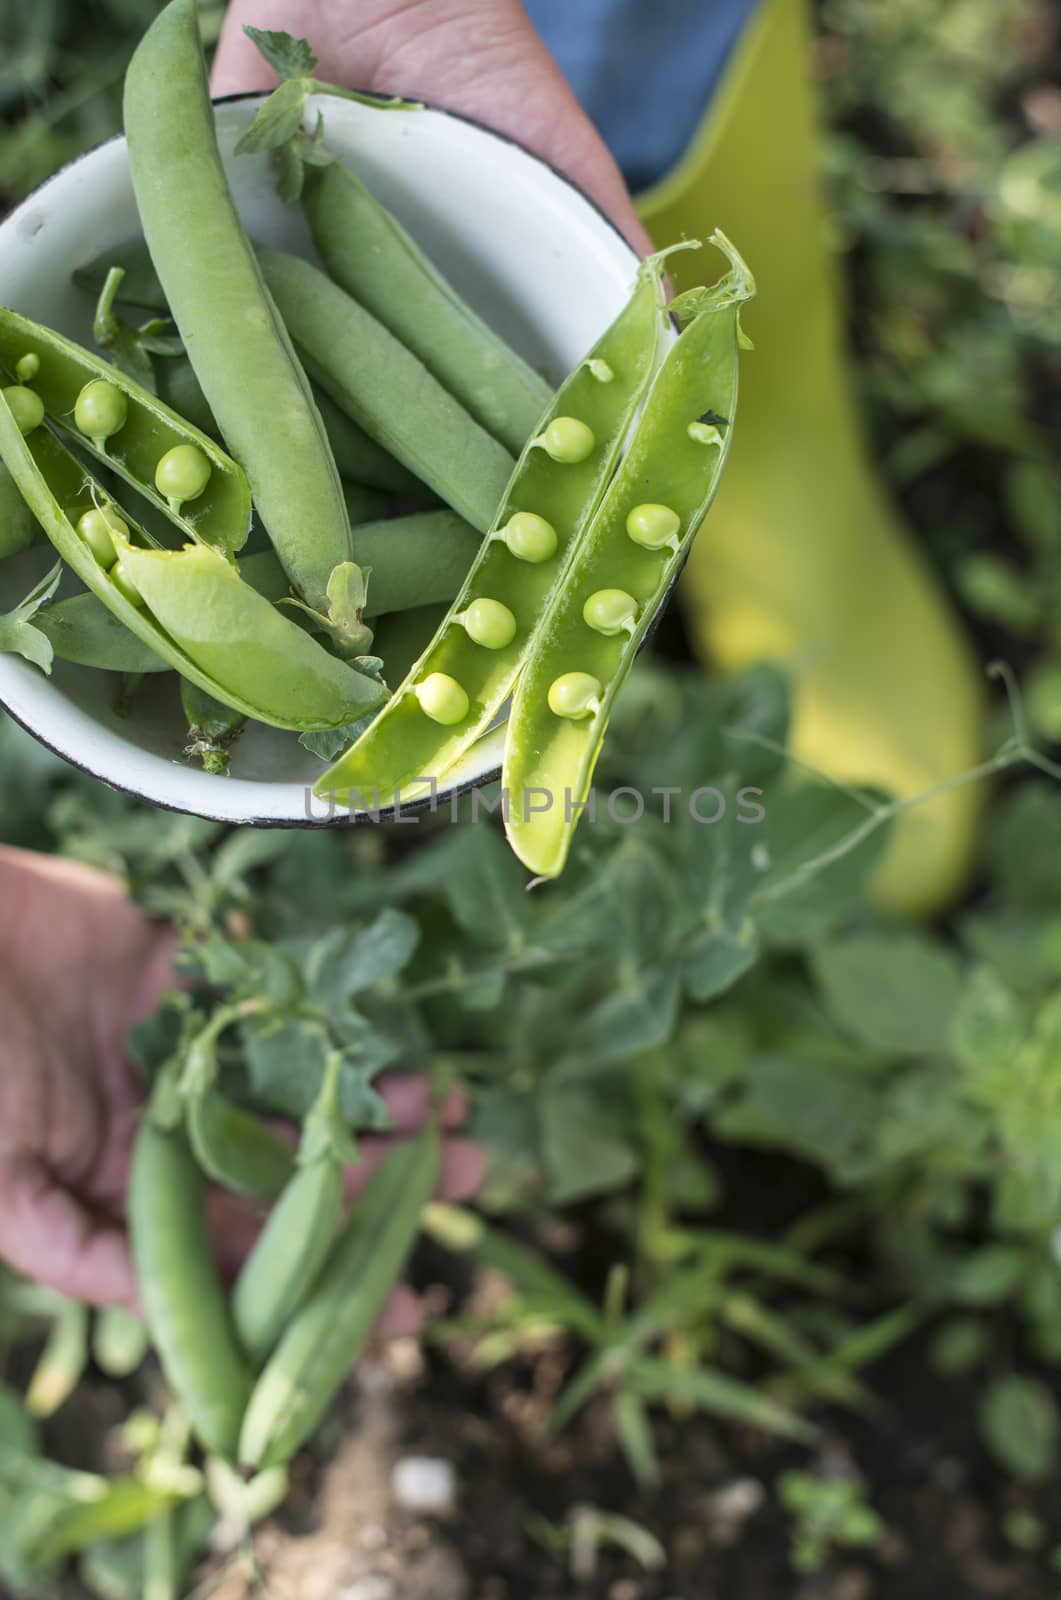 Picking pea plants in a garden. Close up pea beans on daylight. Exterior shot. Organic farm concept. Hands hold pea plant.